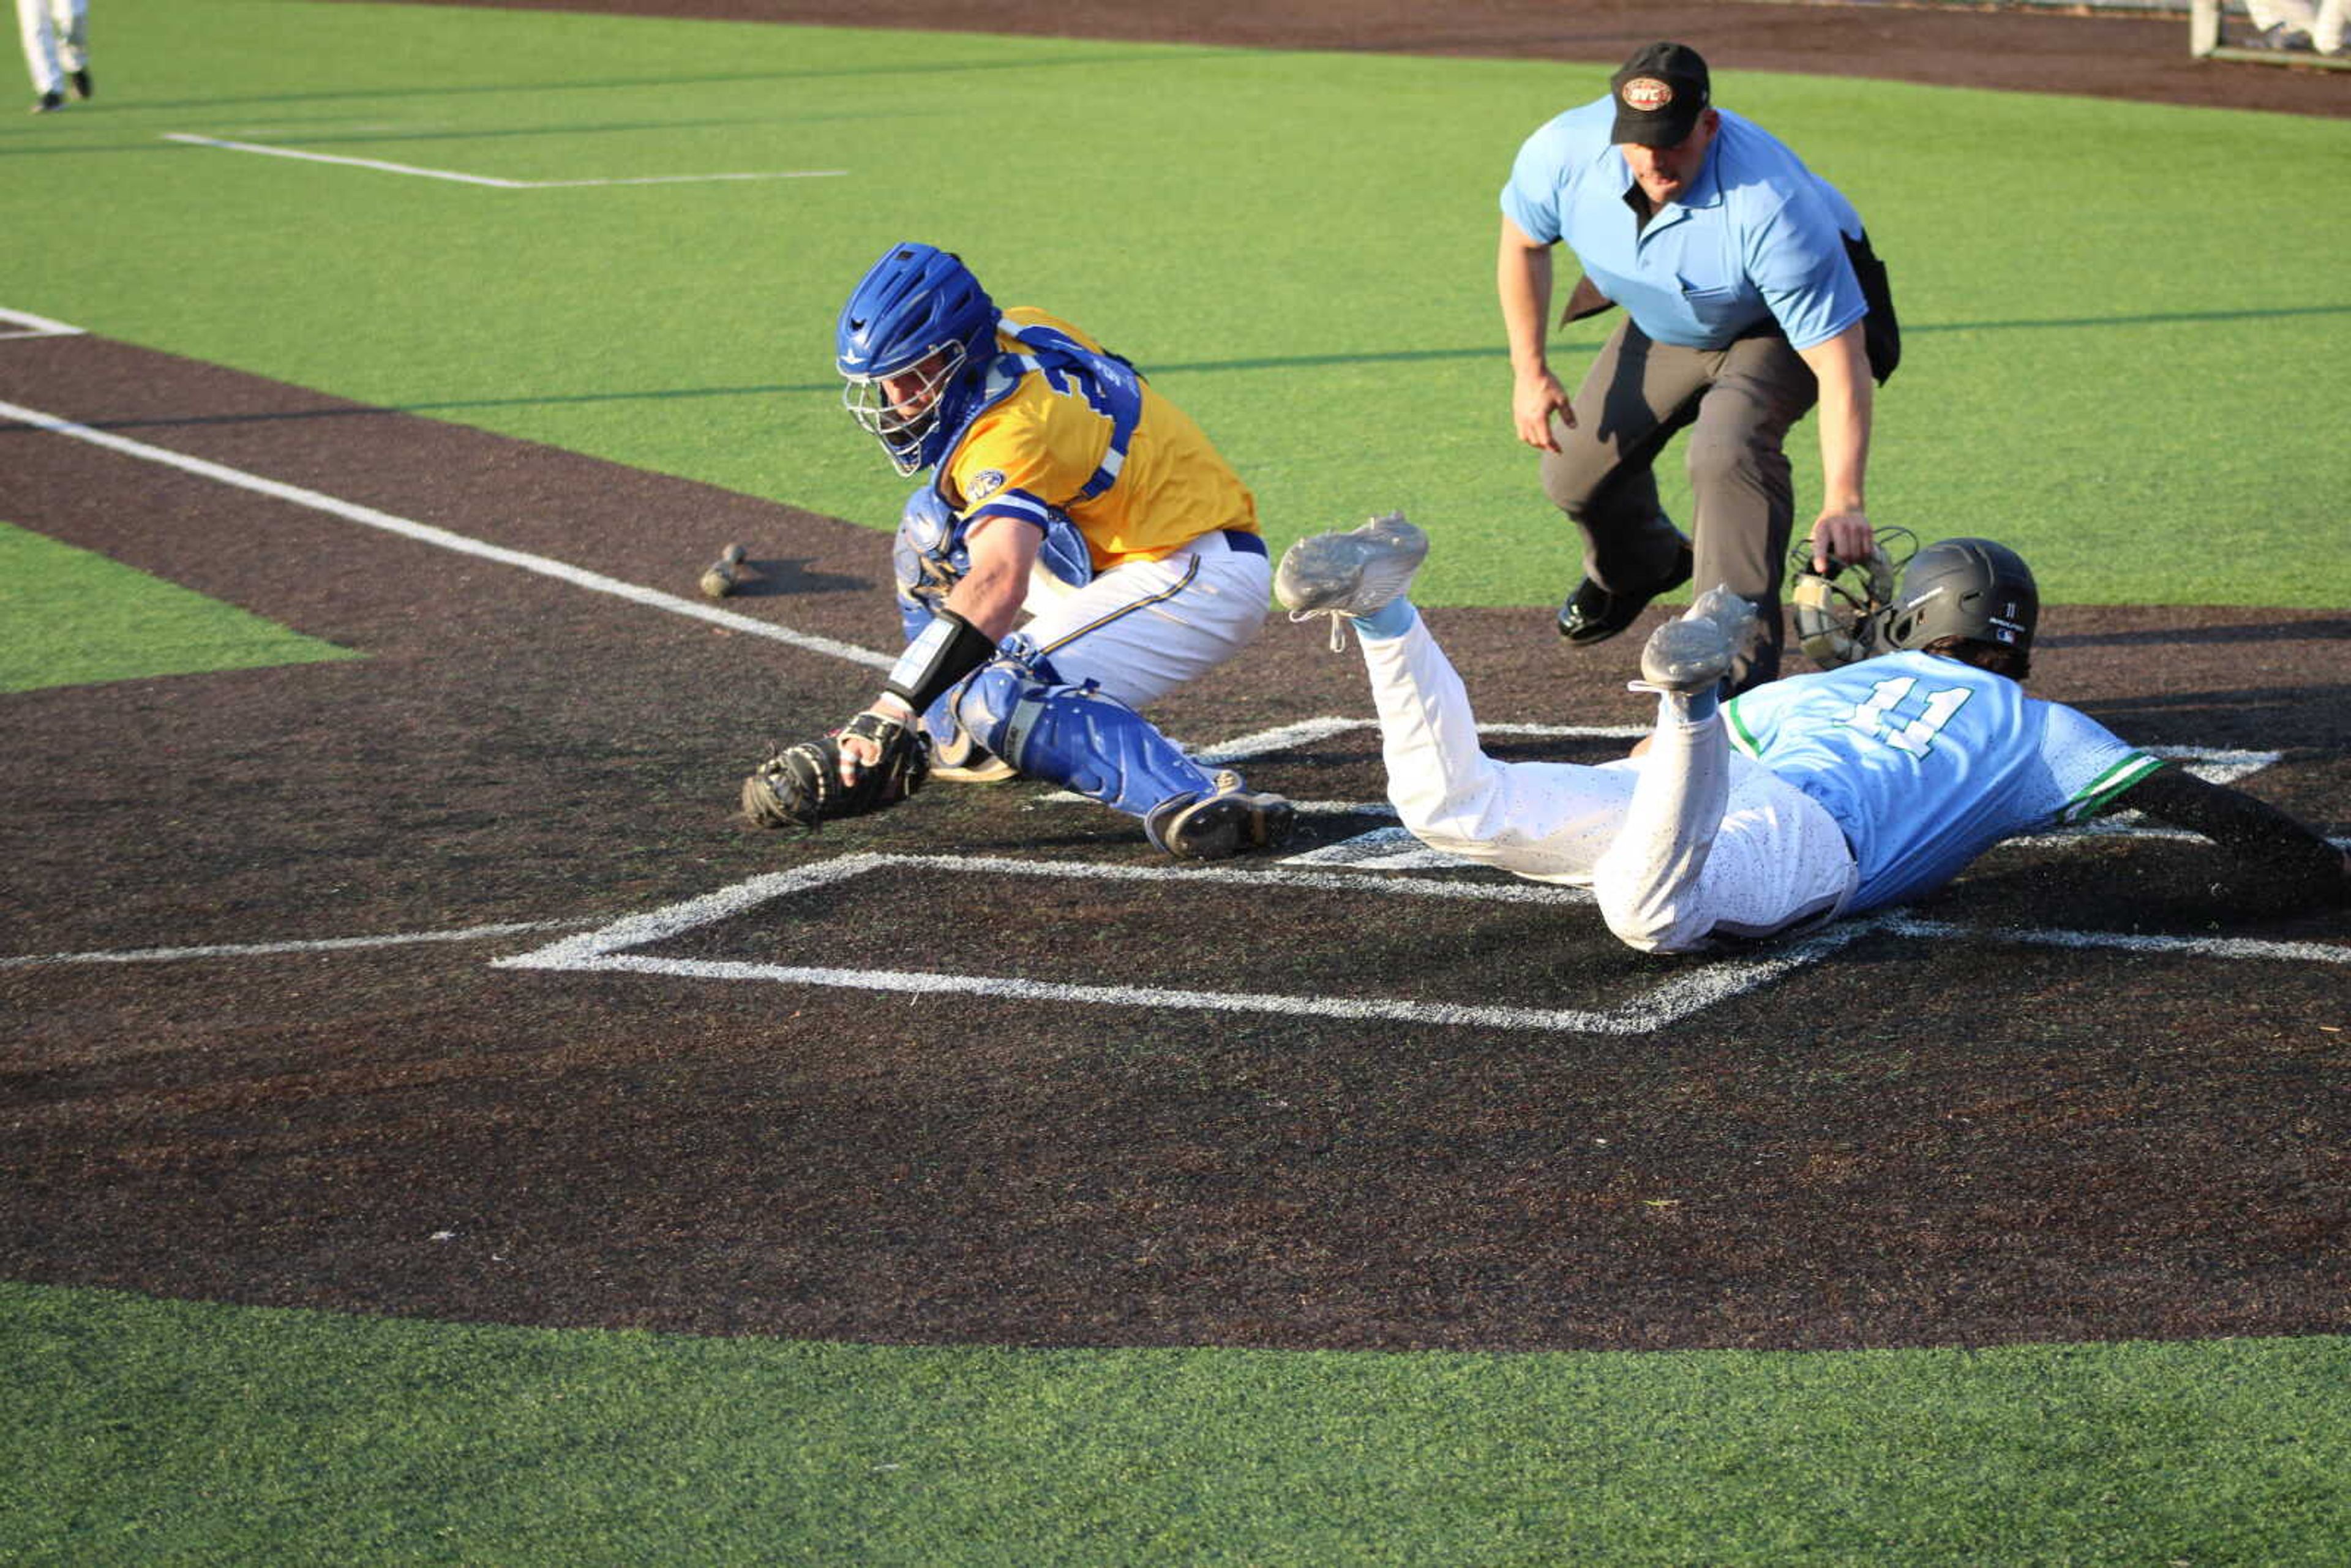 Sophomore second baseman Ben Palmer dives to homeplate to score a run for the Redhawks April 23.